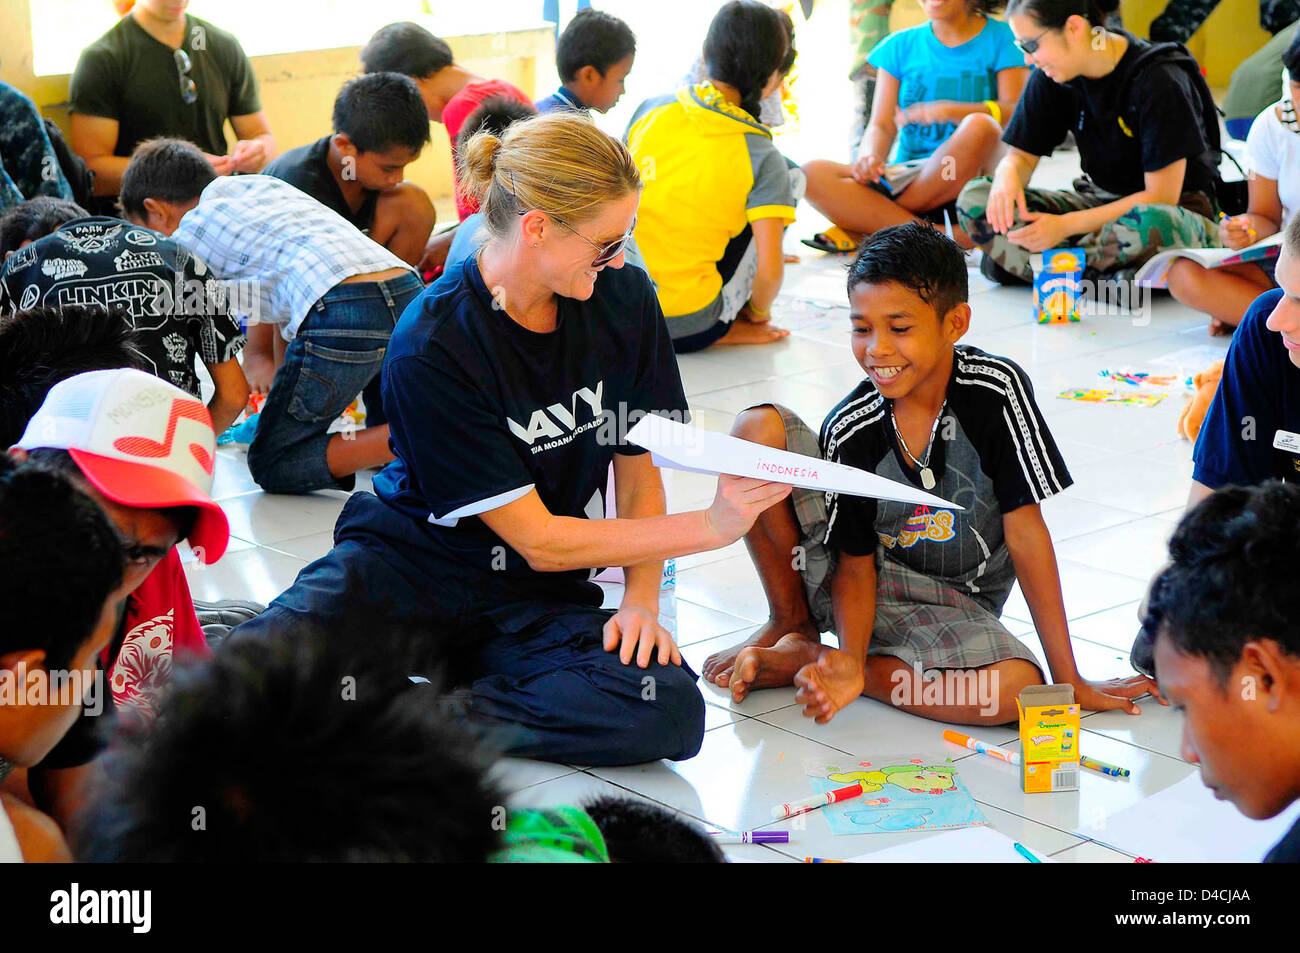 New Zealand Defence Force Lt. Cmdr. Kerry Climo Gives an Indonesian Boy a Paper Airplane Stock Photo